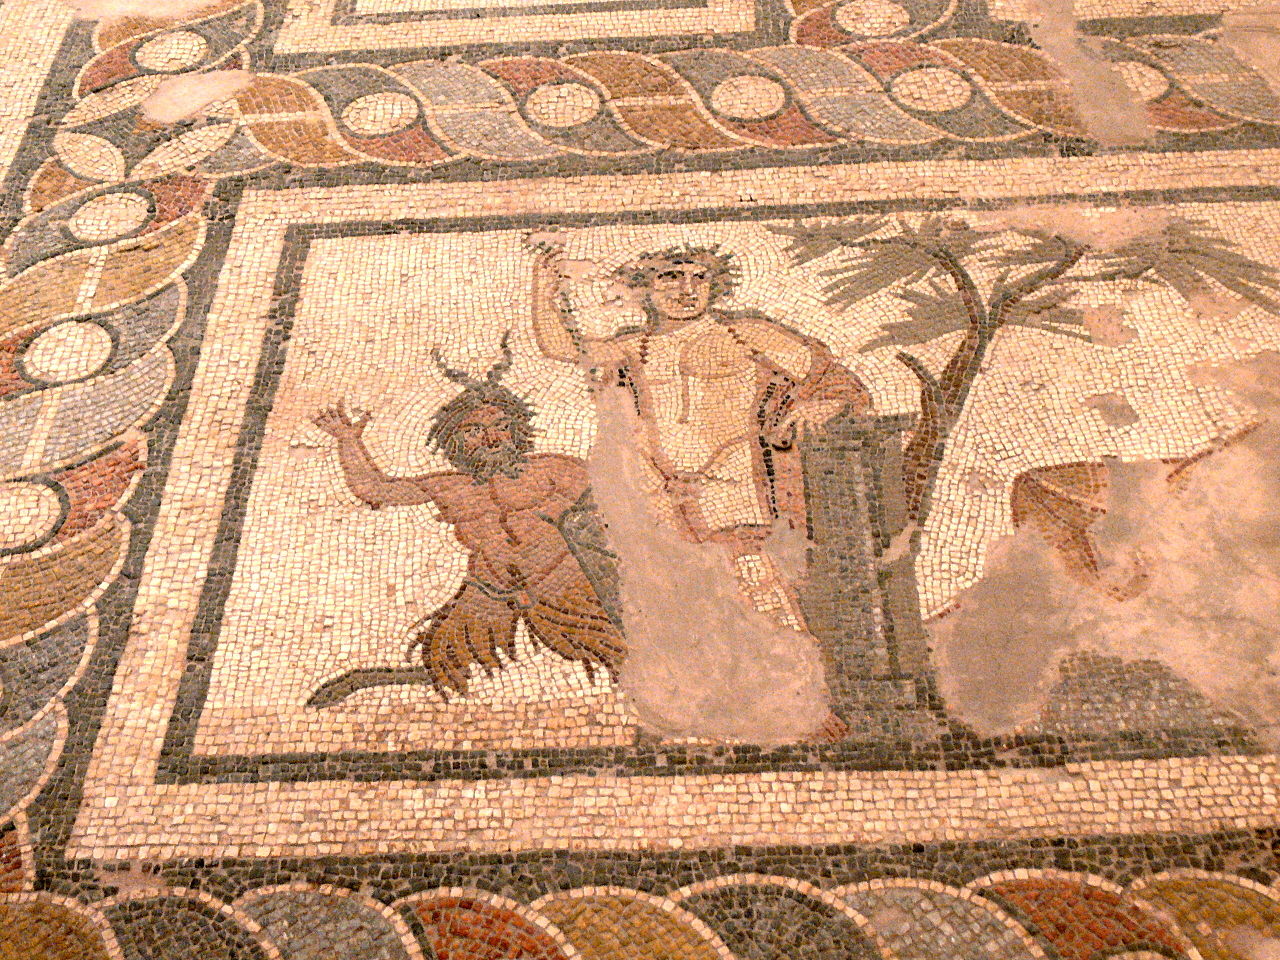 https://commons.wikimedia.org/wiki/Category:Ancient_Roman_art_in_the_Archaeological_Museum_(Chania)#/media/File:AMC_-_Mosaik_1.jpg